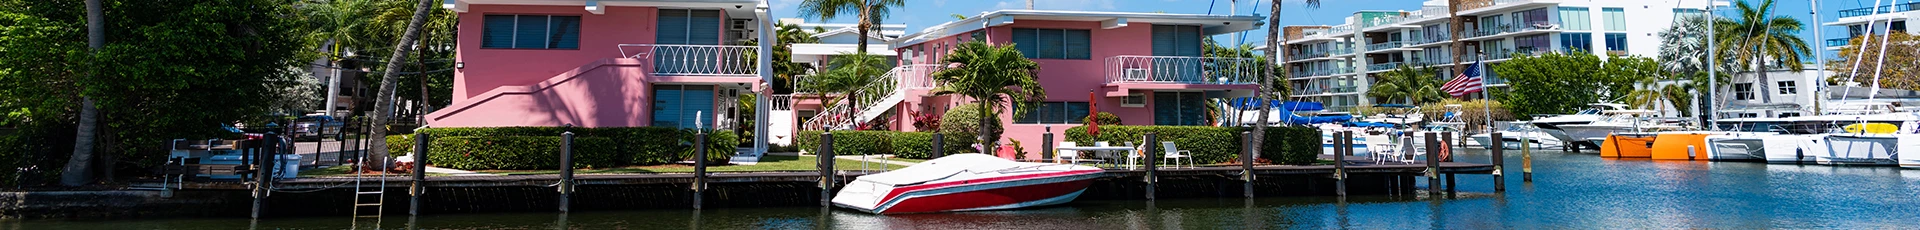 Boat Removal, Dismantle and Disposal in Connerton Florida